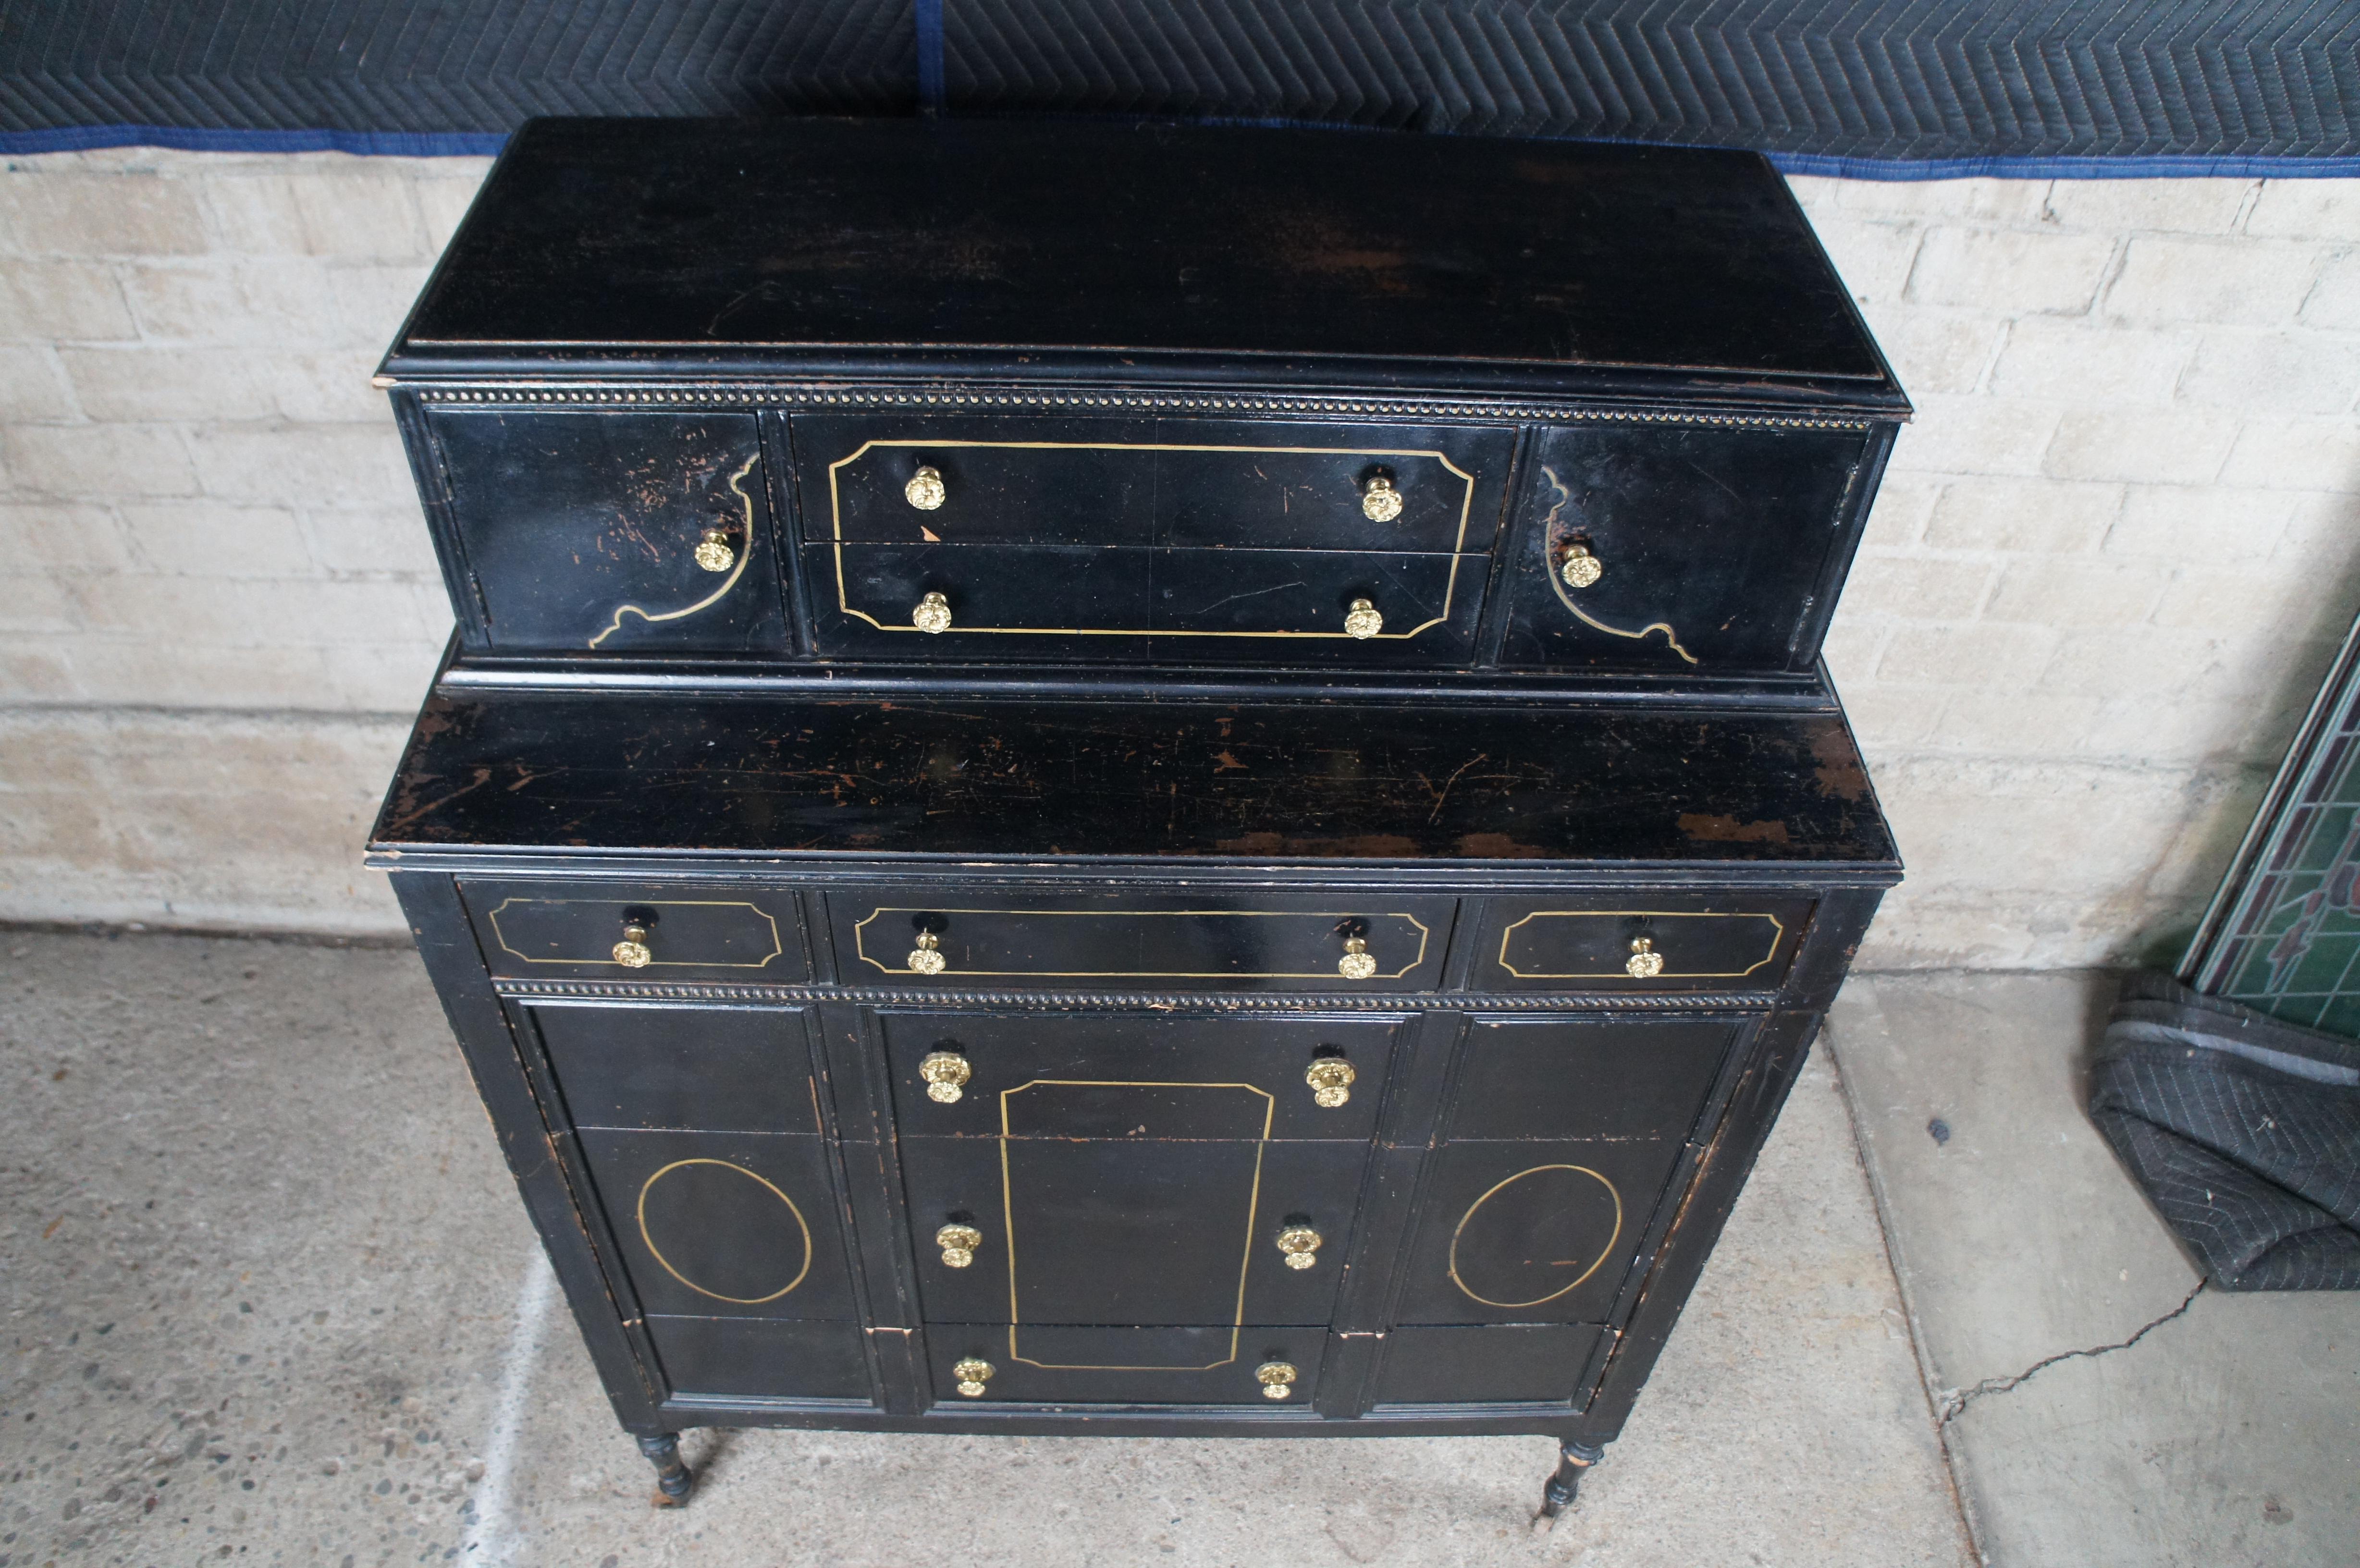 Antique Early 20th Century Painted Mahogany Tallboy Dresser Chest of Drawers In Good Condition For Sale In Dayton, OH